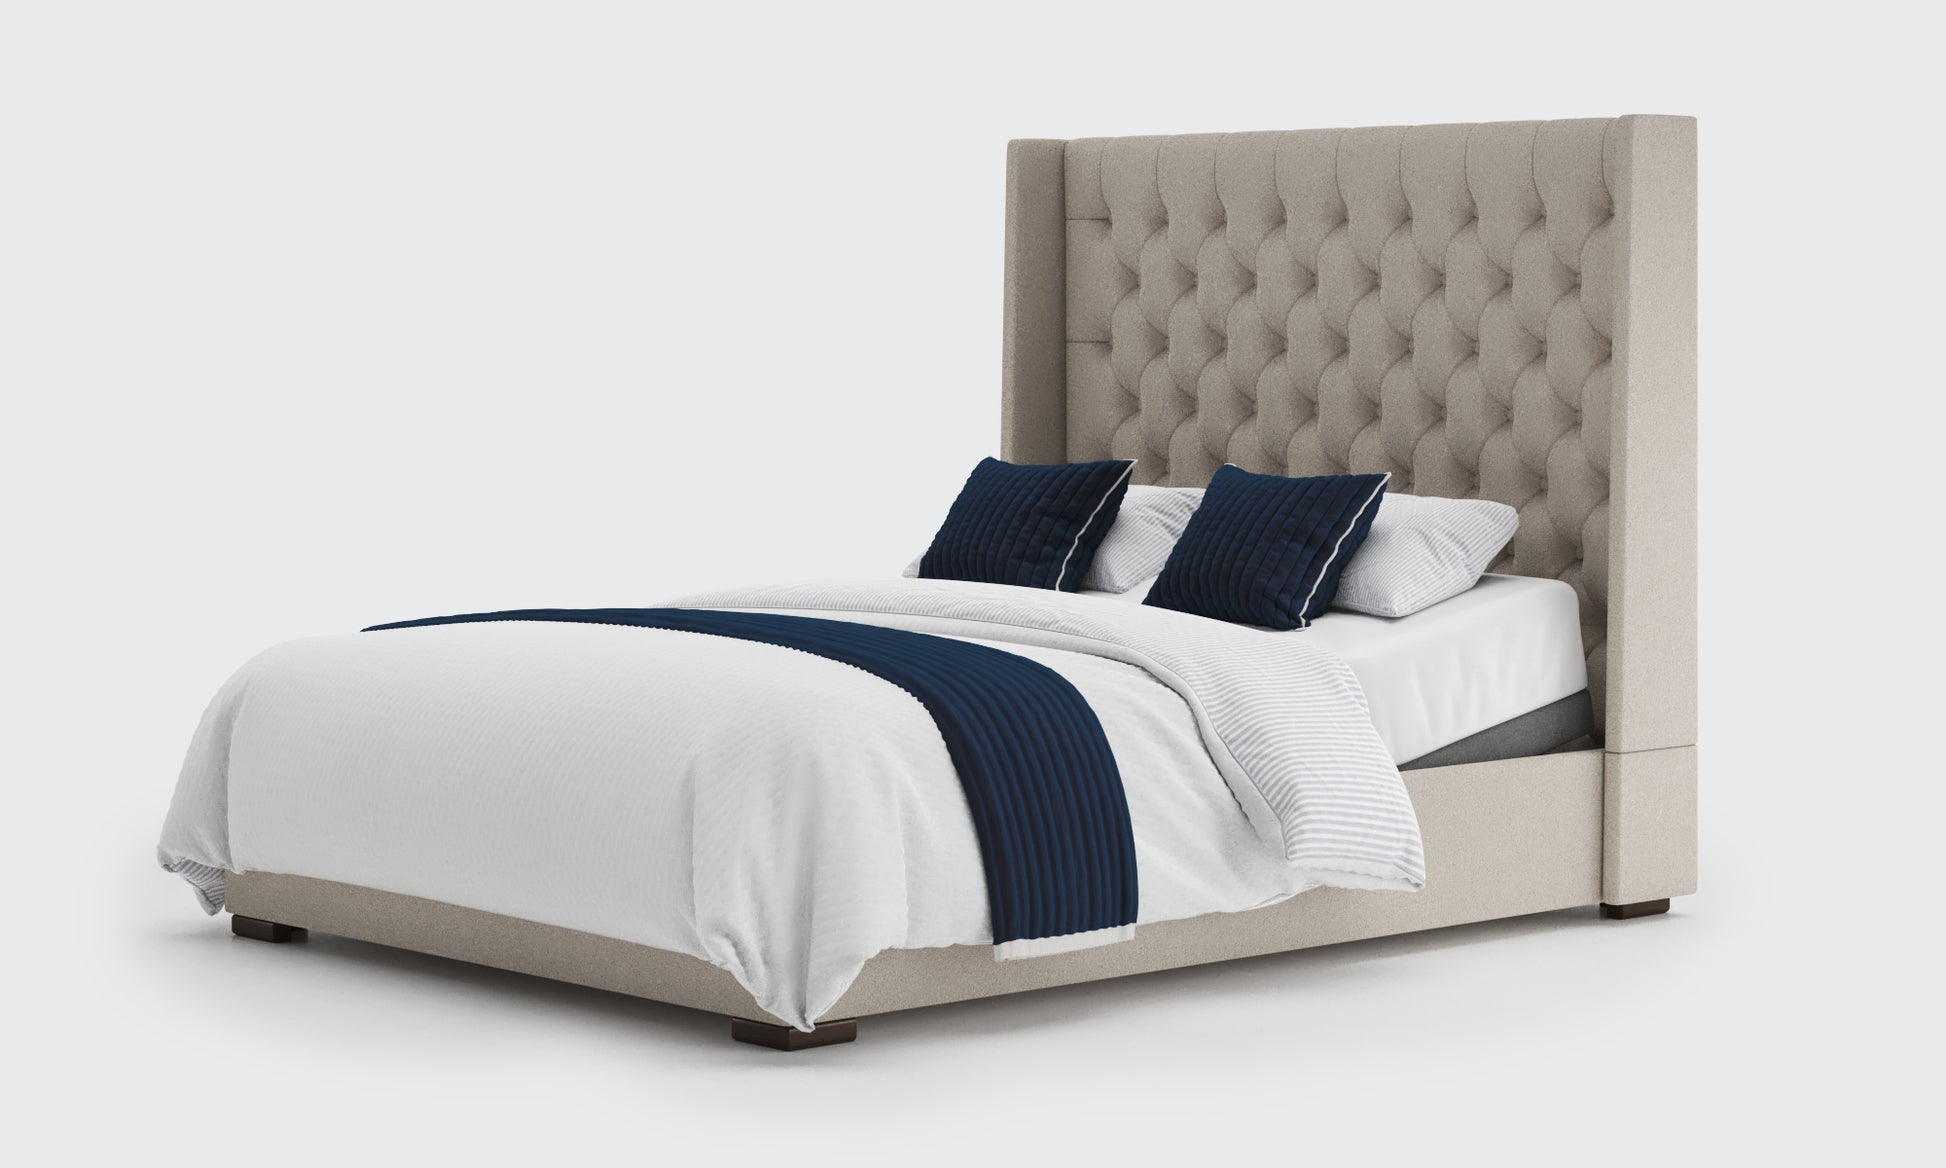 Premium adjustable 5ft double bed in the linen material